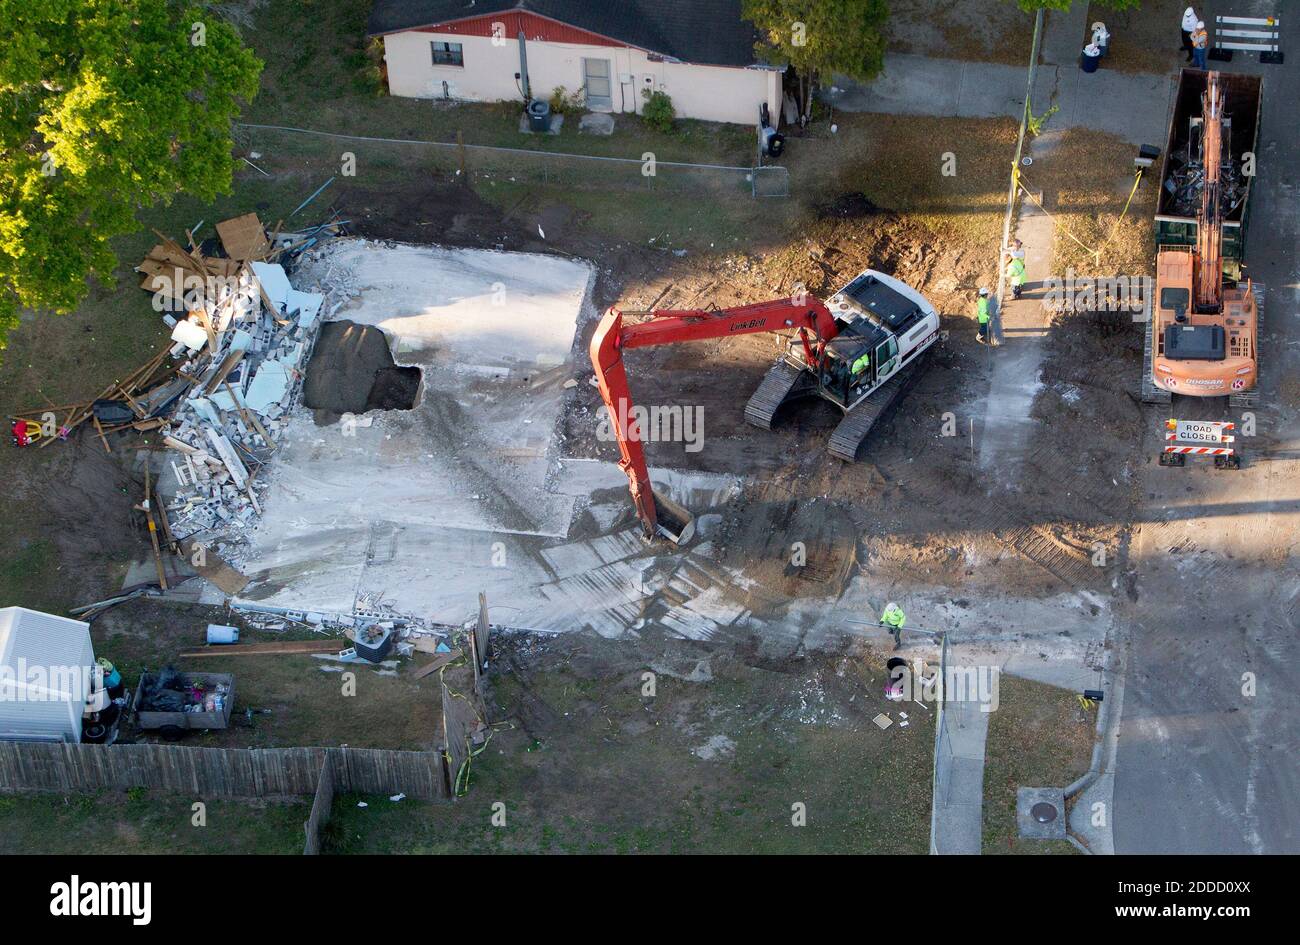 NO FILM, NO VIDEO, NO TV, NO DOCUMENTARY - An aerial view of a sinkhole at 240 Faithway Drive in Seffner, FL, USA, that opened up, killing Jeffrey Bush is seen March 4, 2013. The sinkhole is exposed as demolition of the house continues. Photo by Dirk Shadd/Tampa Bay Times/MCT/ABACAPRESS.COM Stock Photo